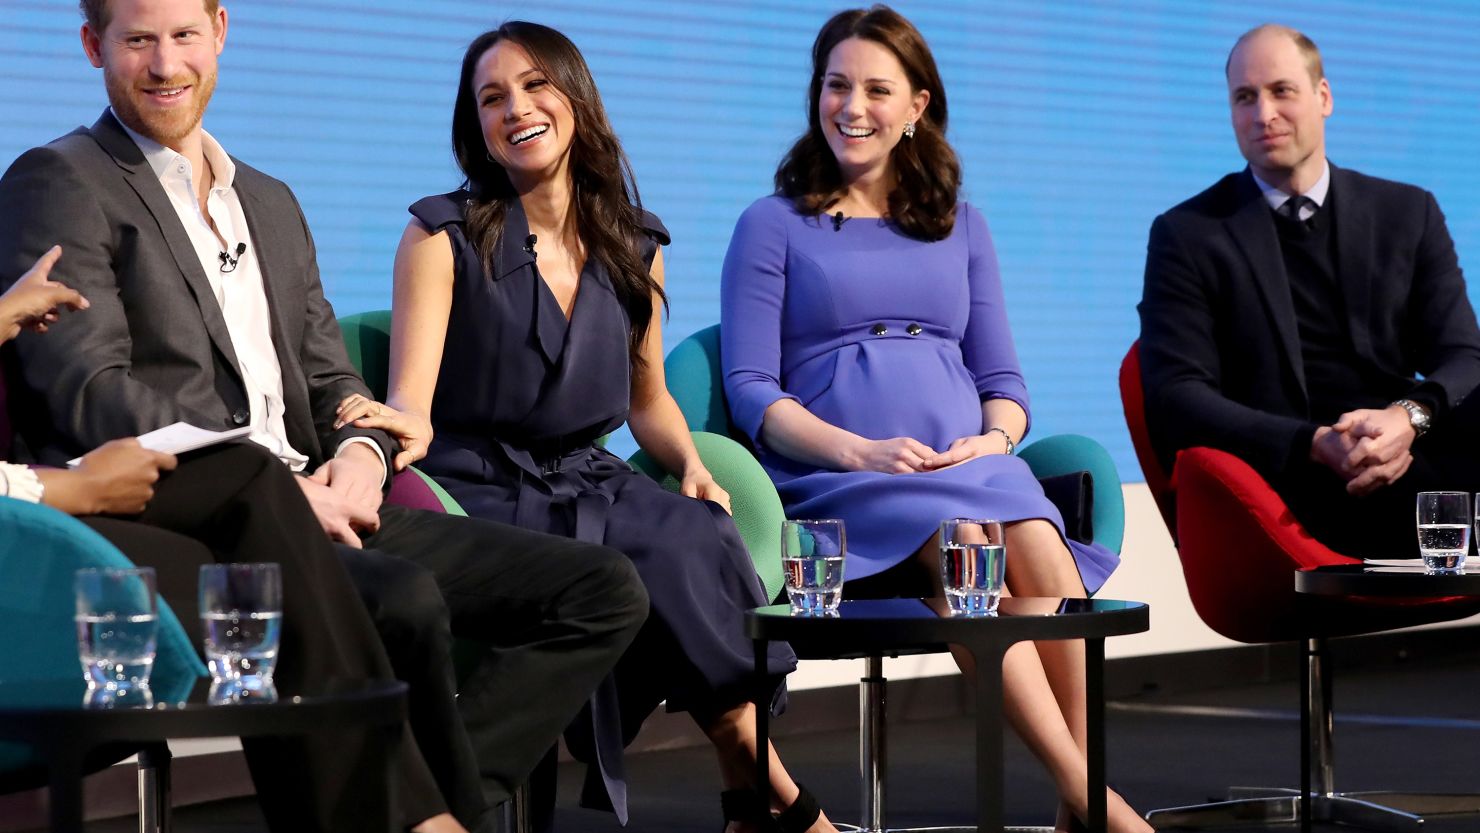 Prince Harry, Meghan Markle, Kate Middleton and Prince William share a stage.